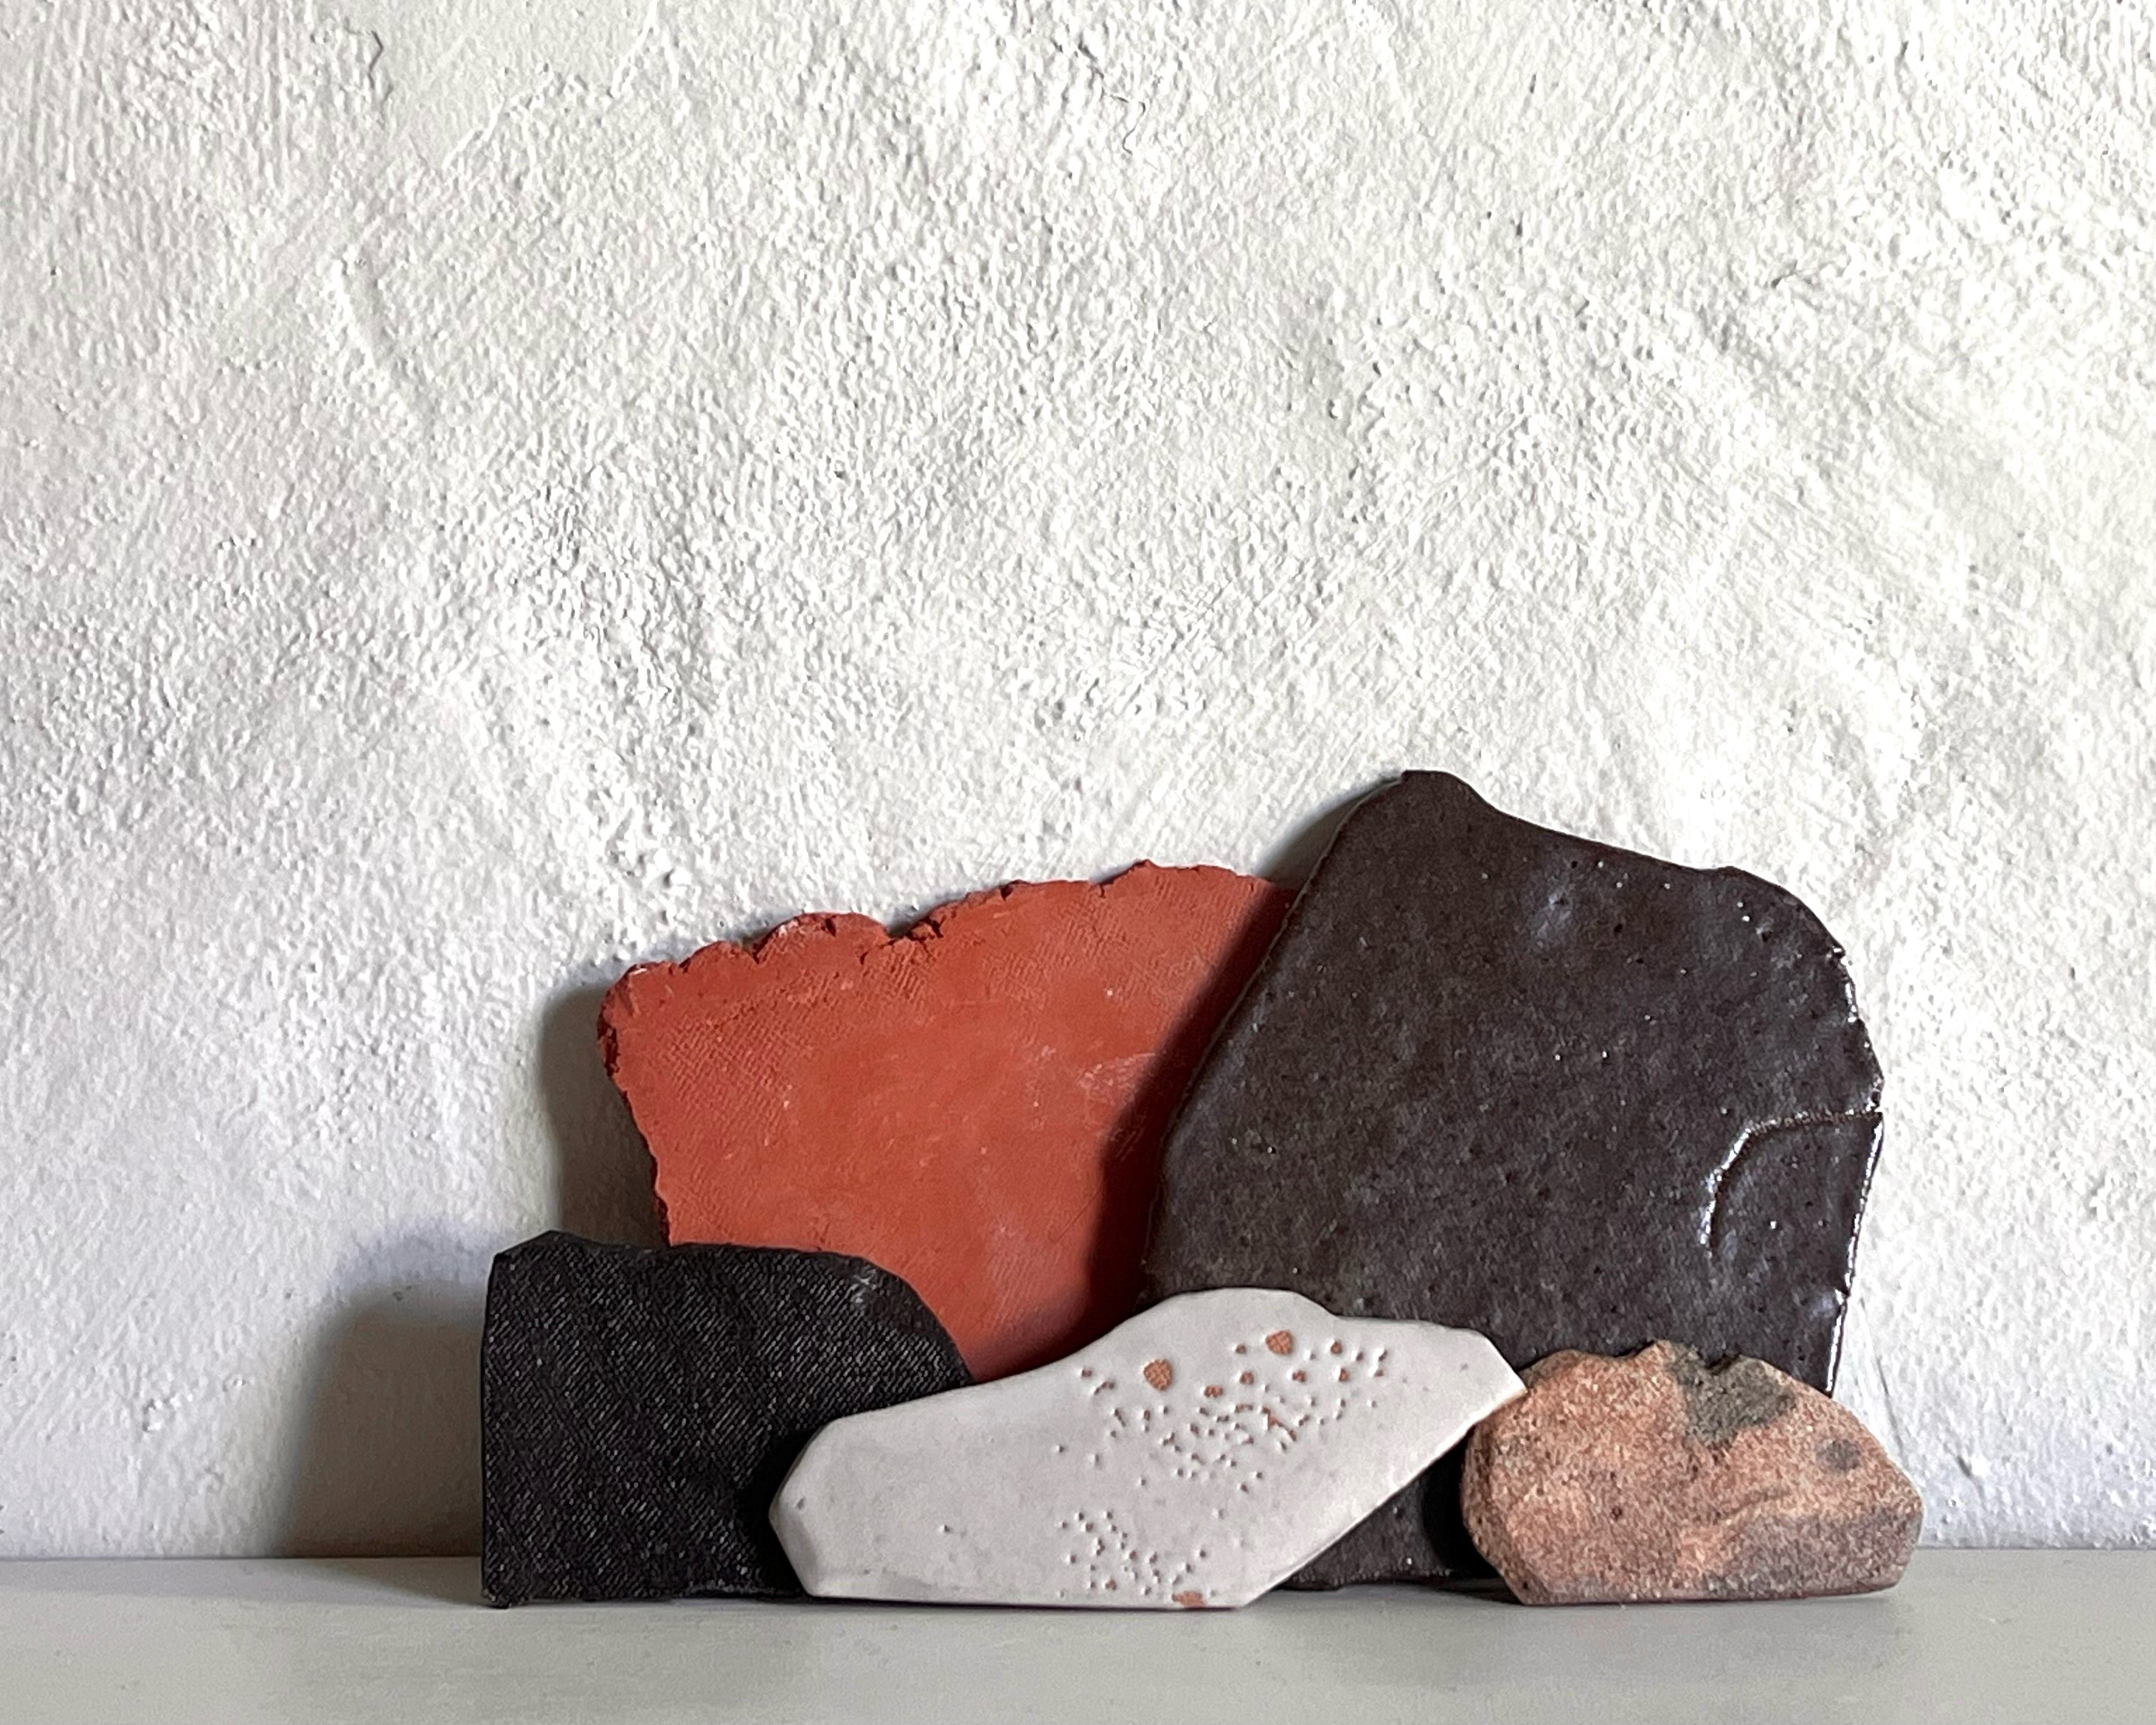 Five small organic, flat shapes of clay in earth tones arranged to form a landscape style arrangement leaning up against a wall.